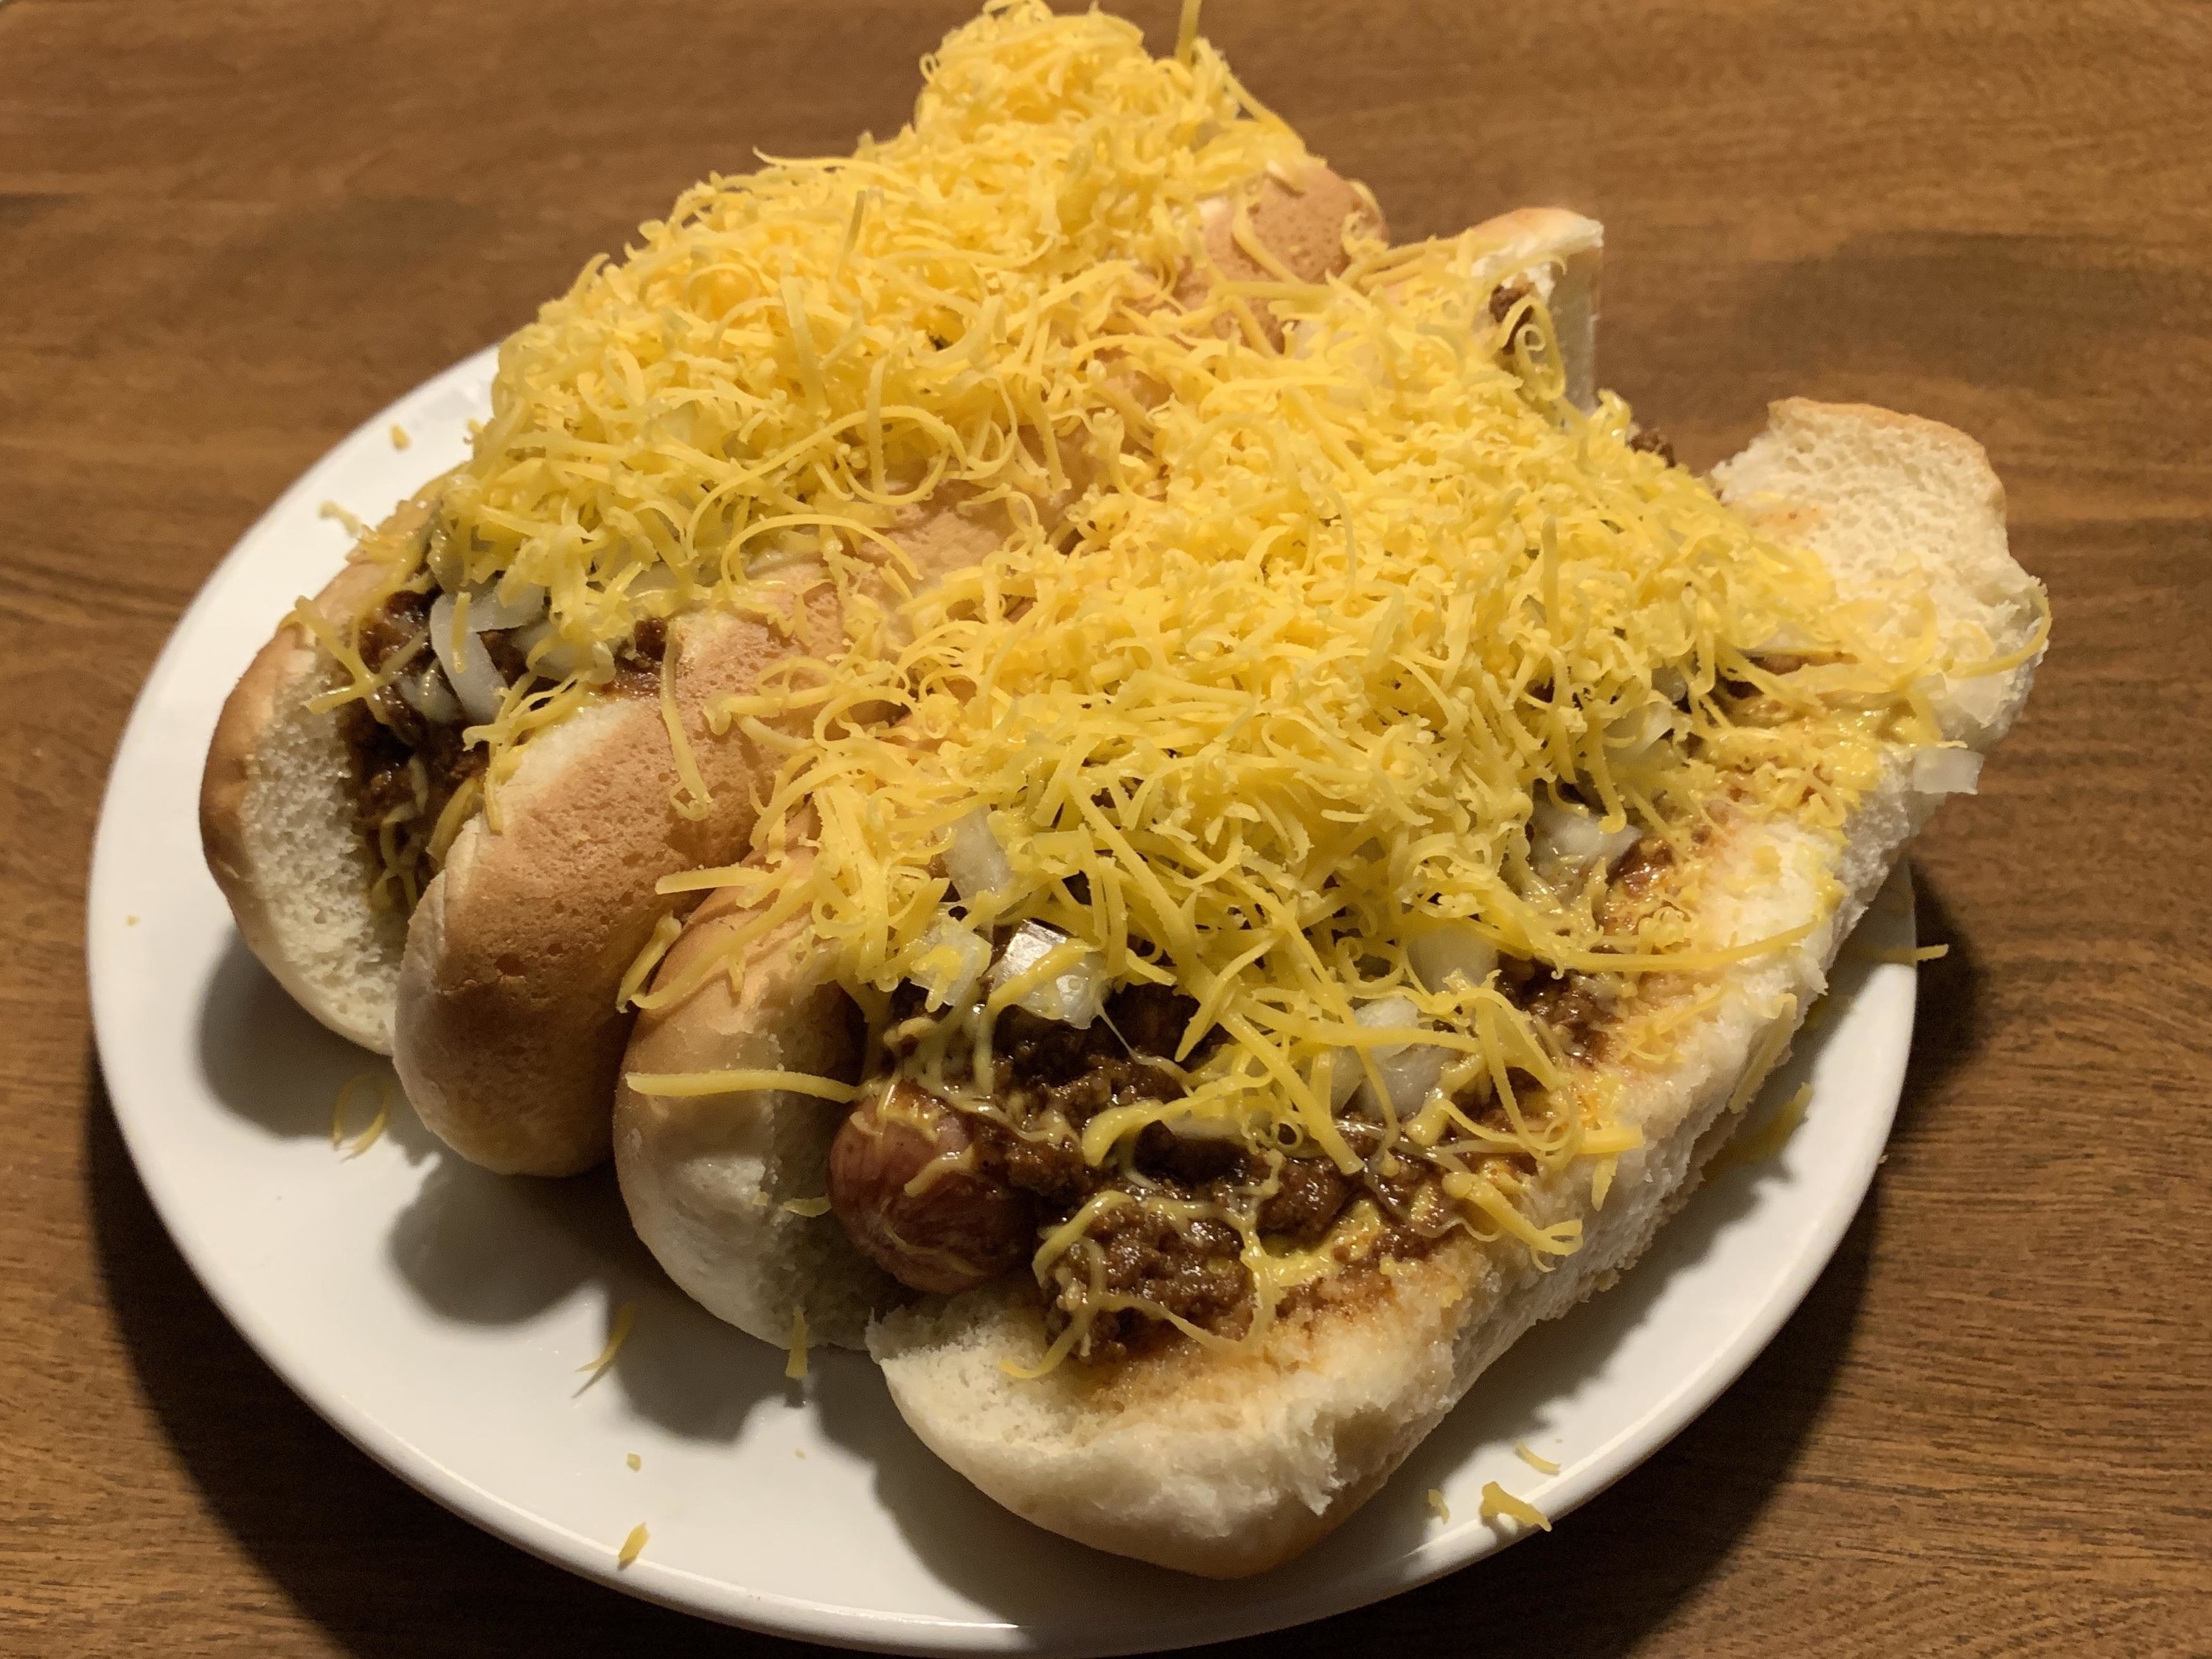 Chili dogs topped with cheese